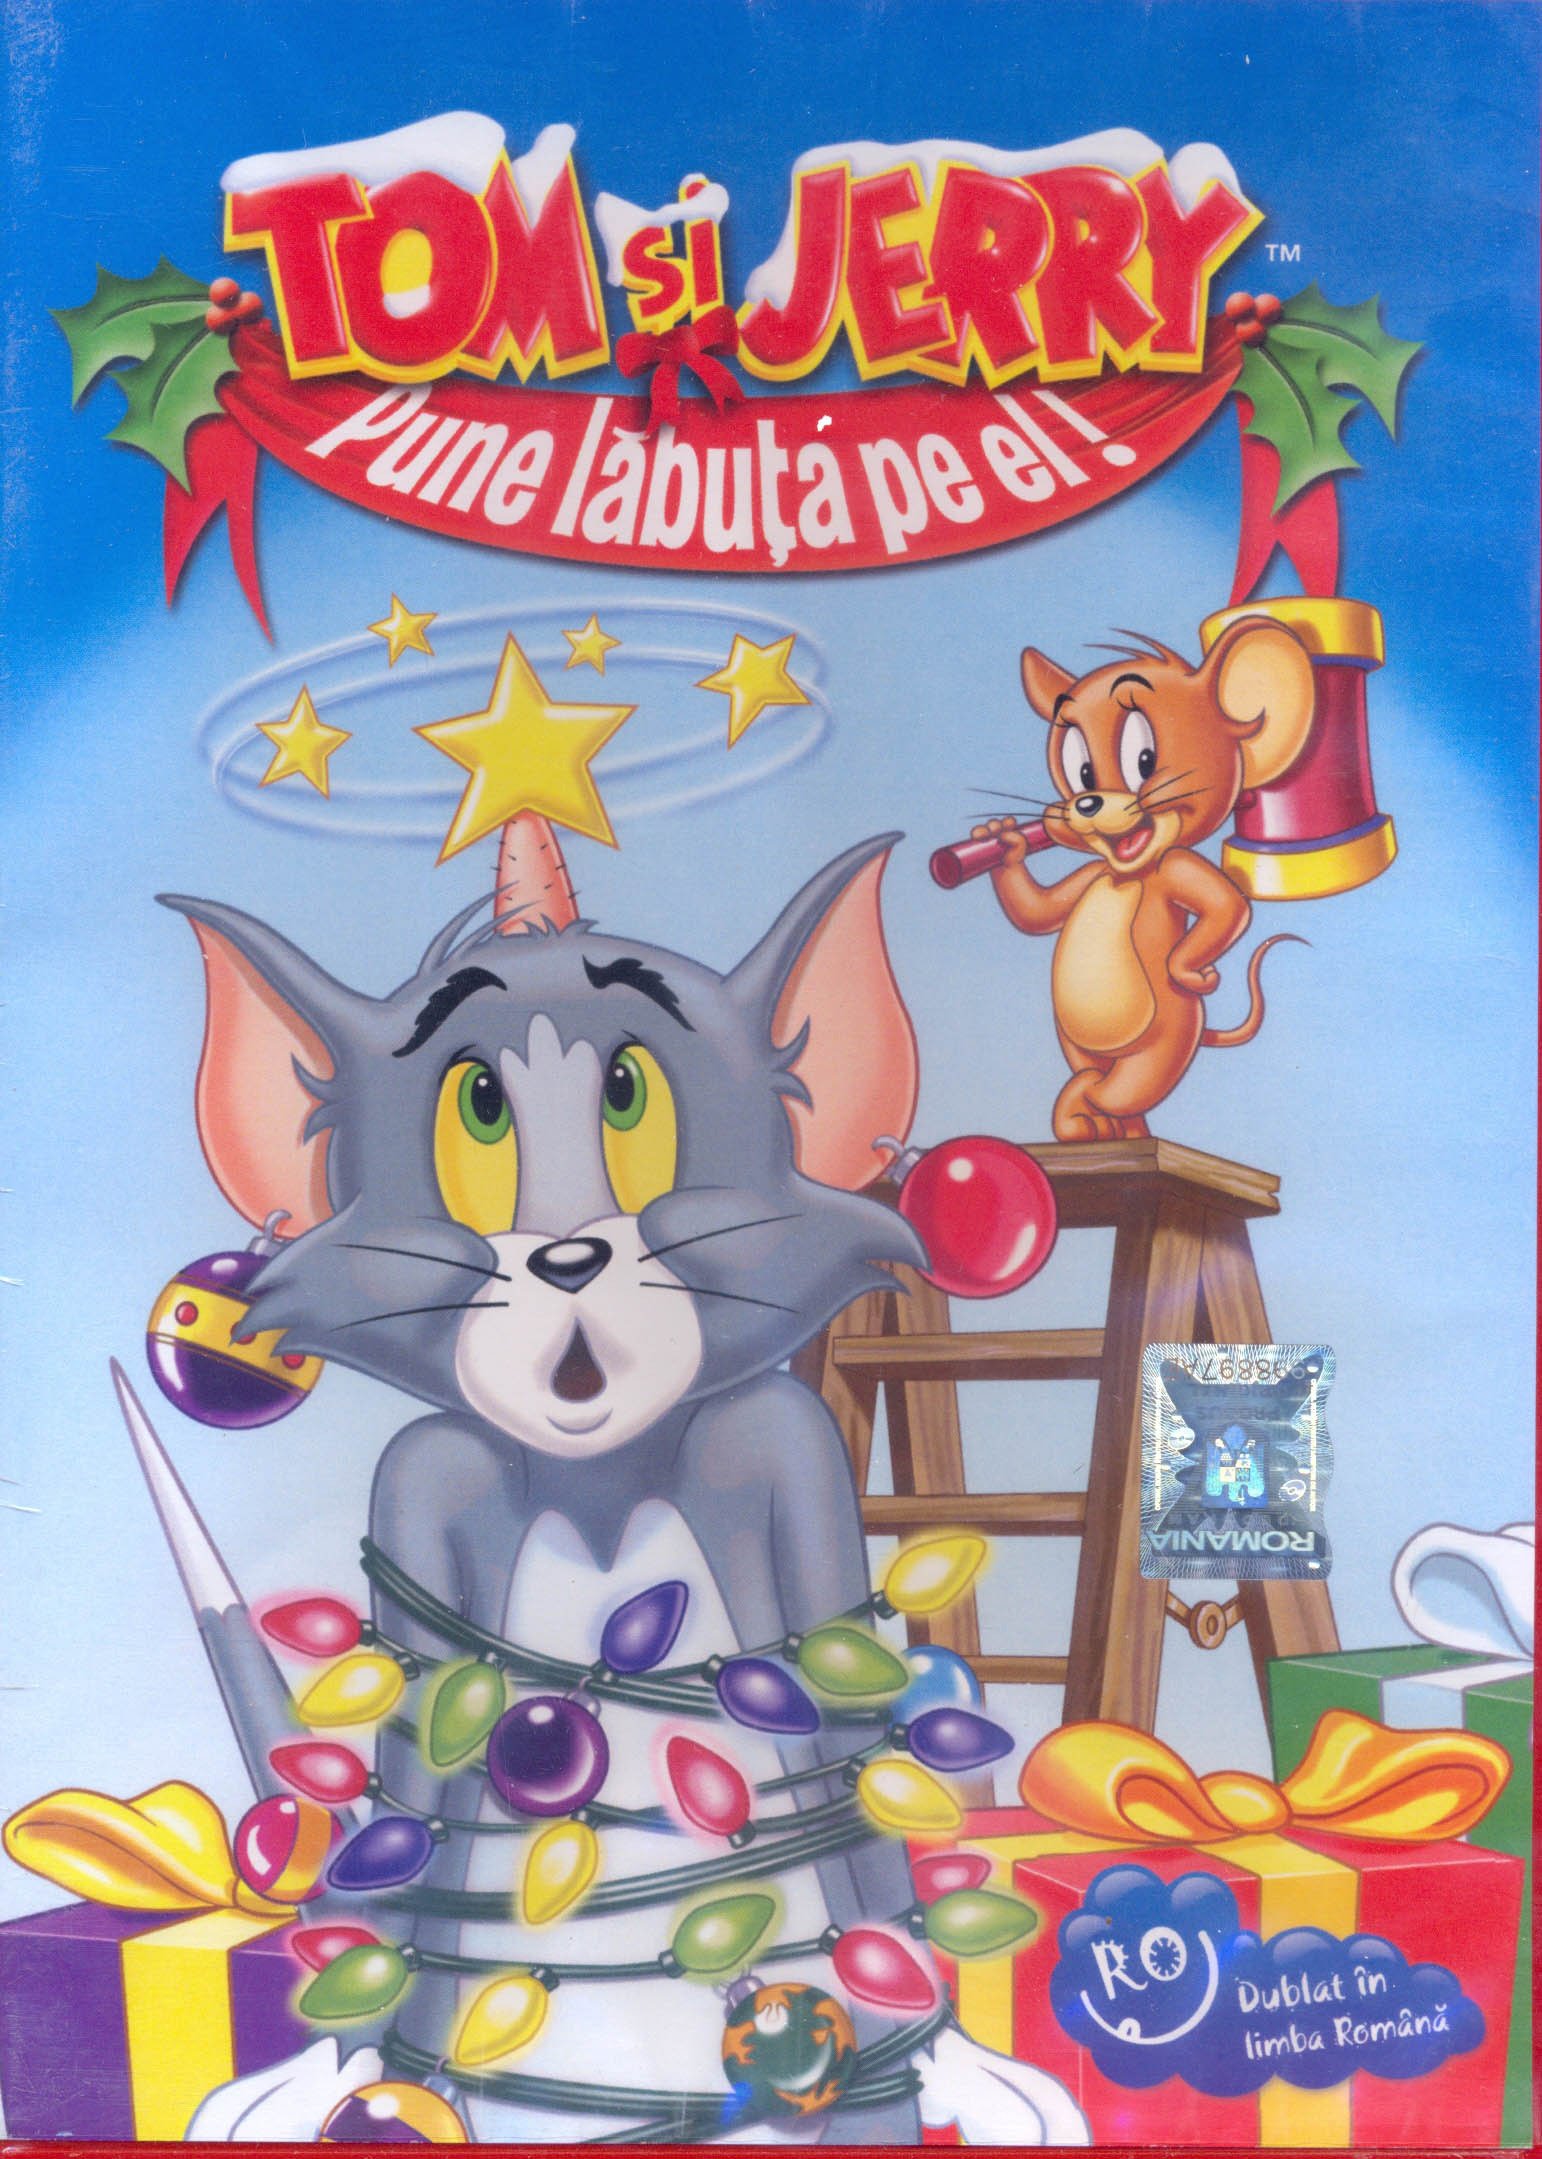 Tom Si Jerry - Pune labuta pe el / Tom and Jerry - Paws for a Holiday | Joseph Barbera